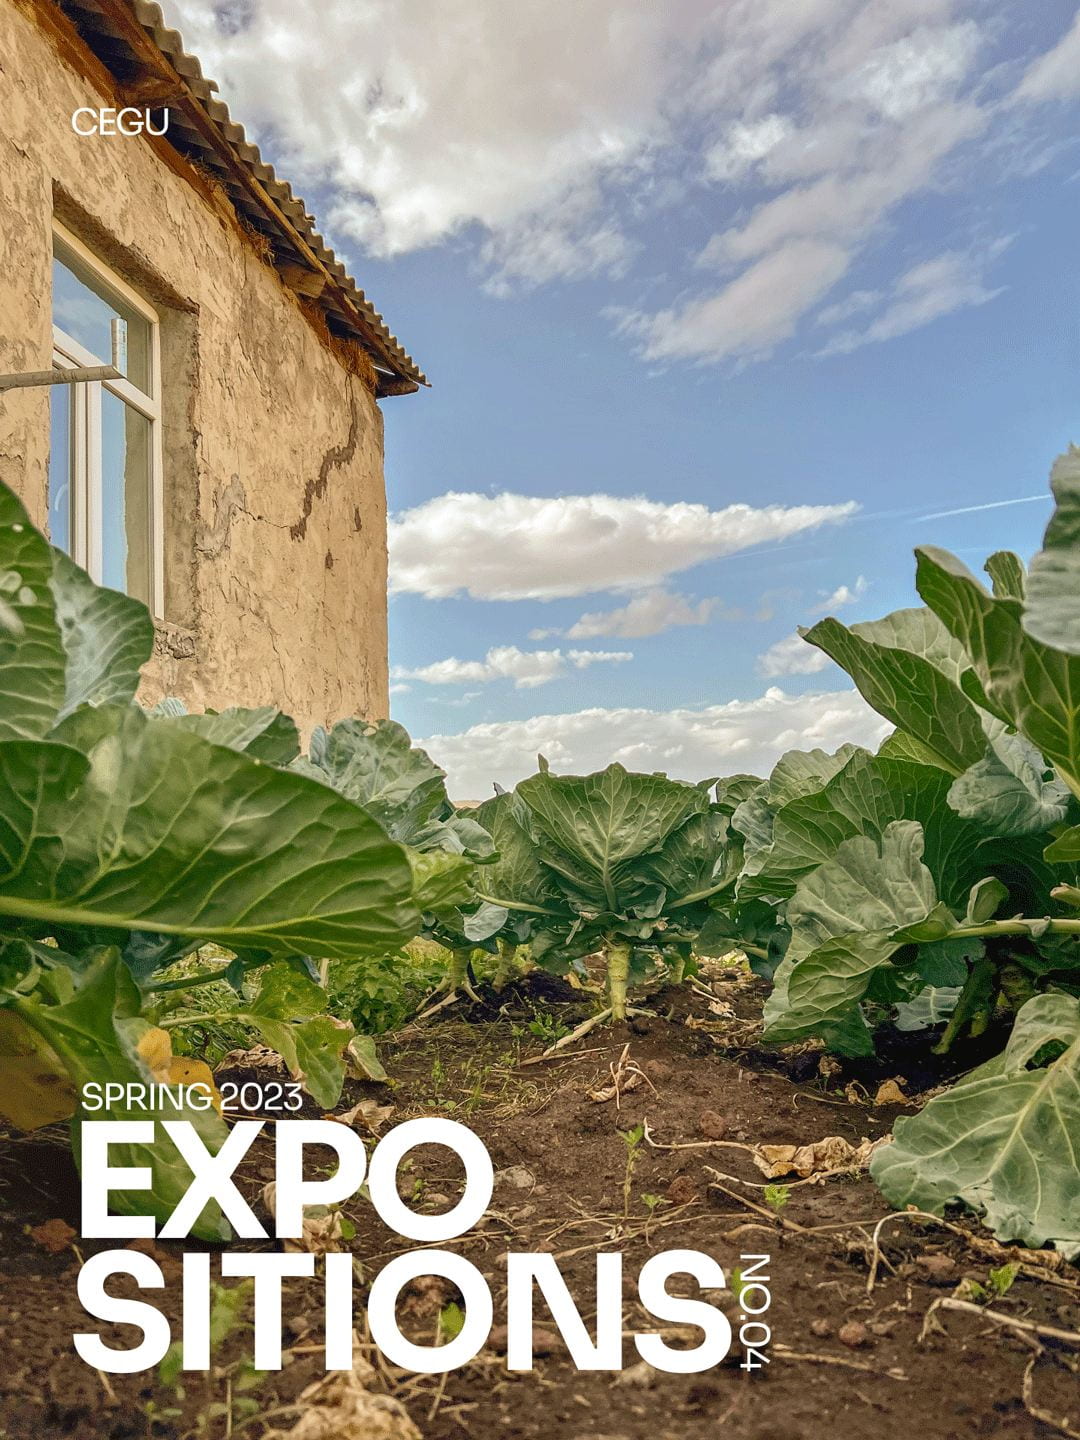 Cover of Expositions Magazine, Issue #4, showing a low-angle photo of cabbages in the foreground with a house and blue cloudy sky in the background